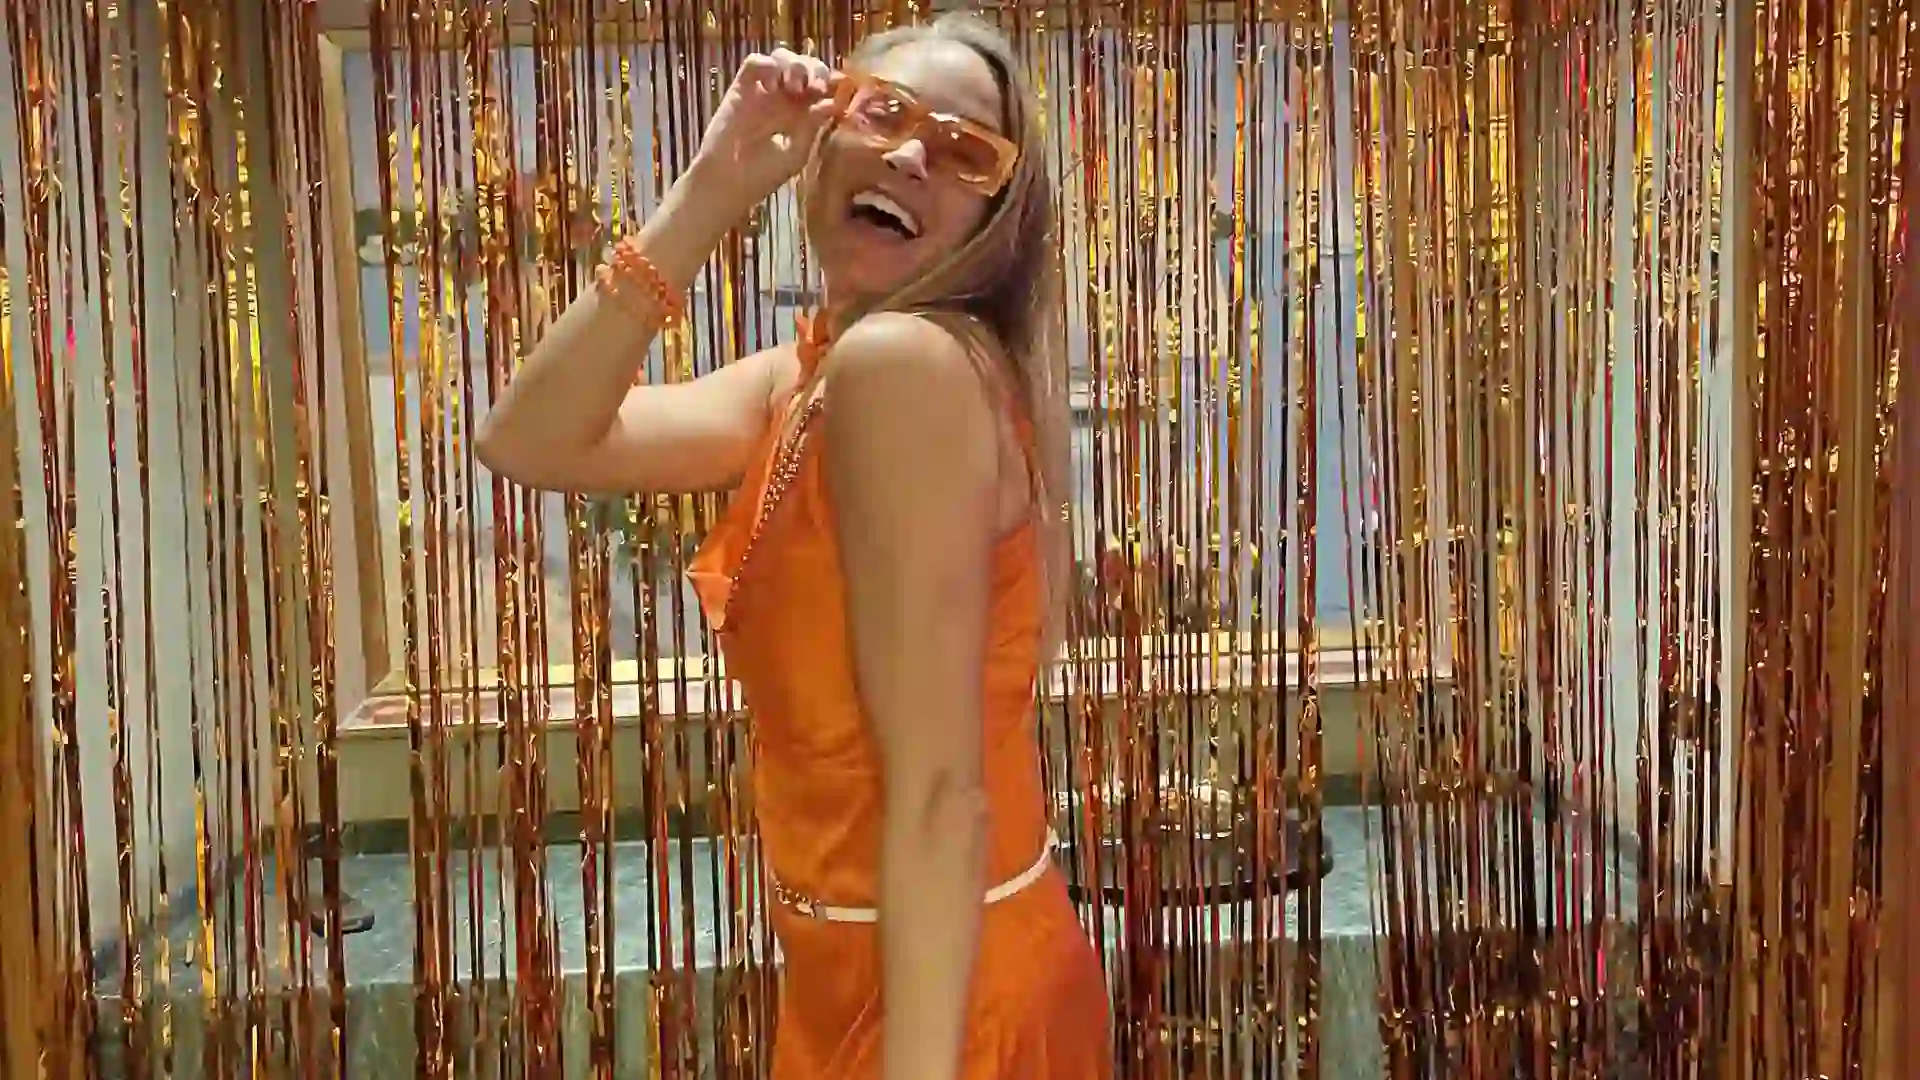 Person wearing orange dress and sunglasses in front of orange streamers at party.